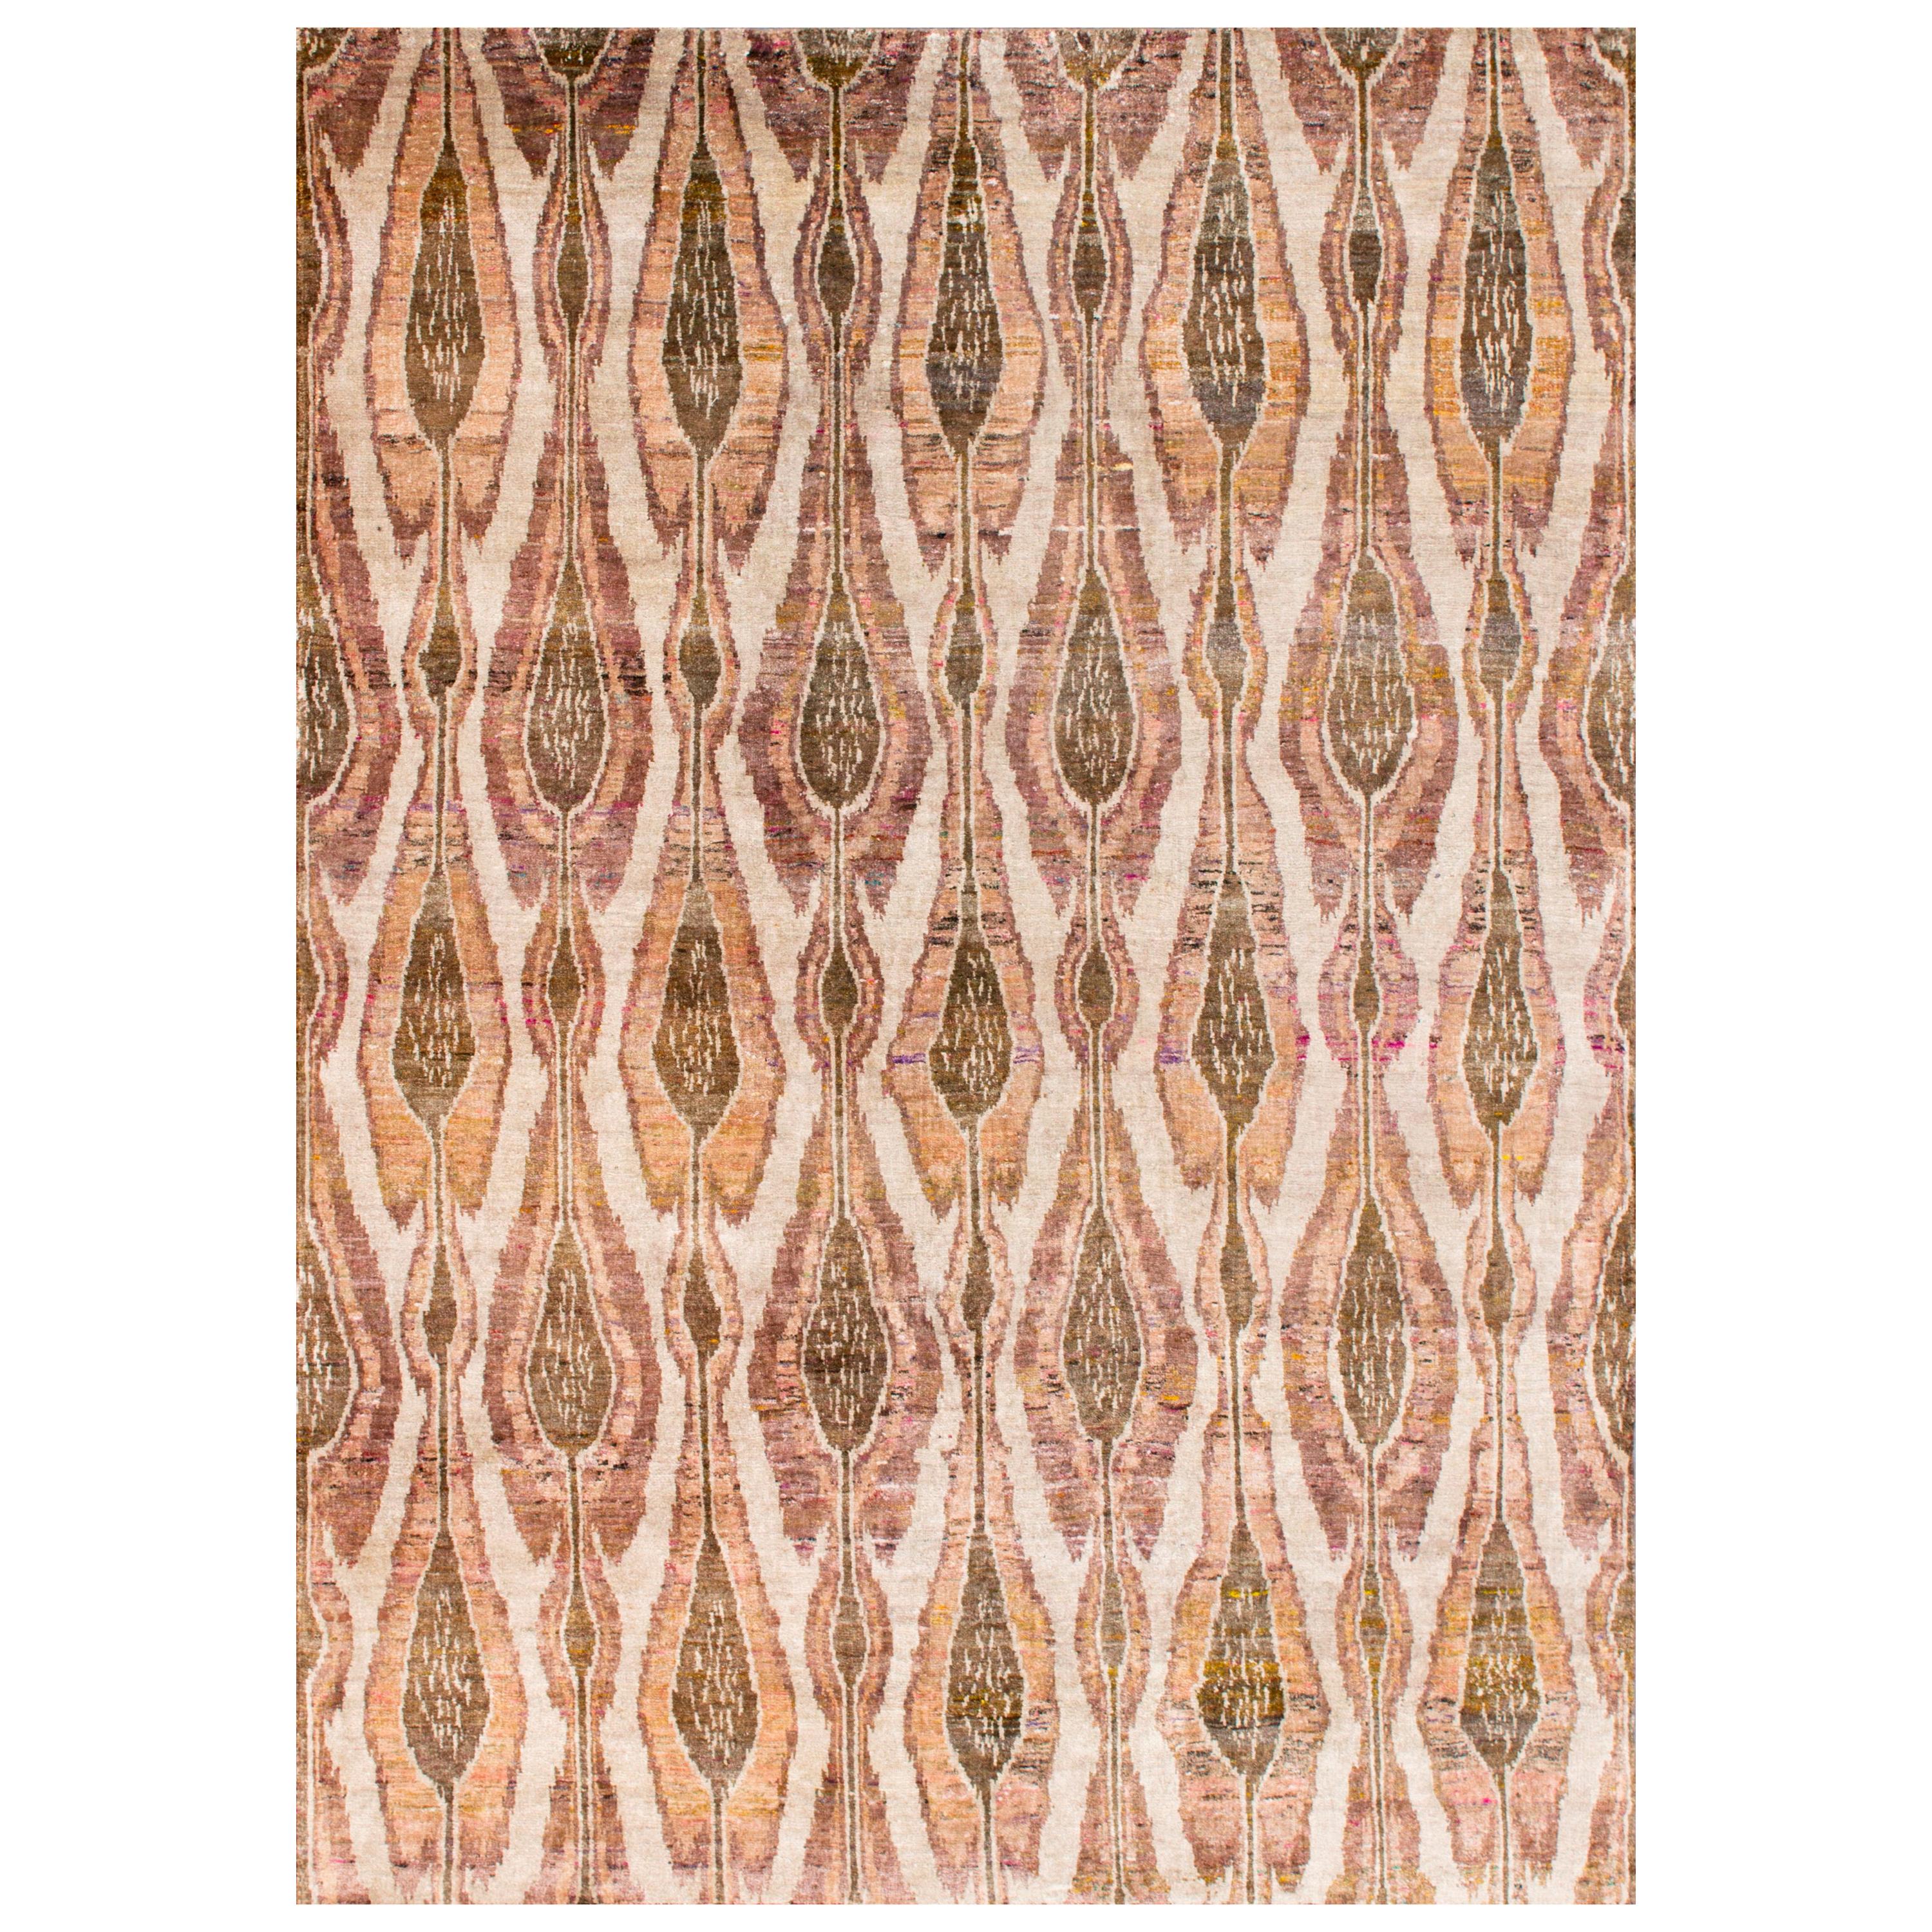 Rust Beige Olive Mustard Eco-Friendly Transitional Ikat Silk Rug in Stock